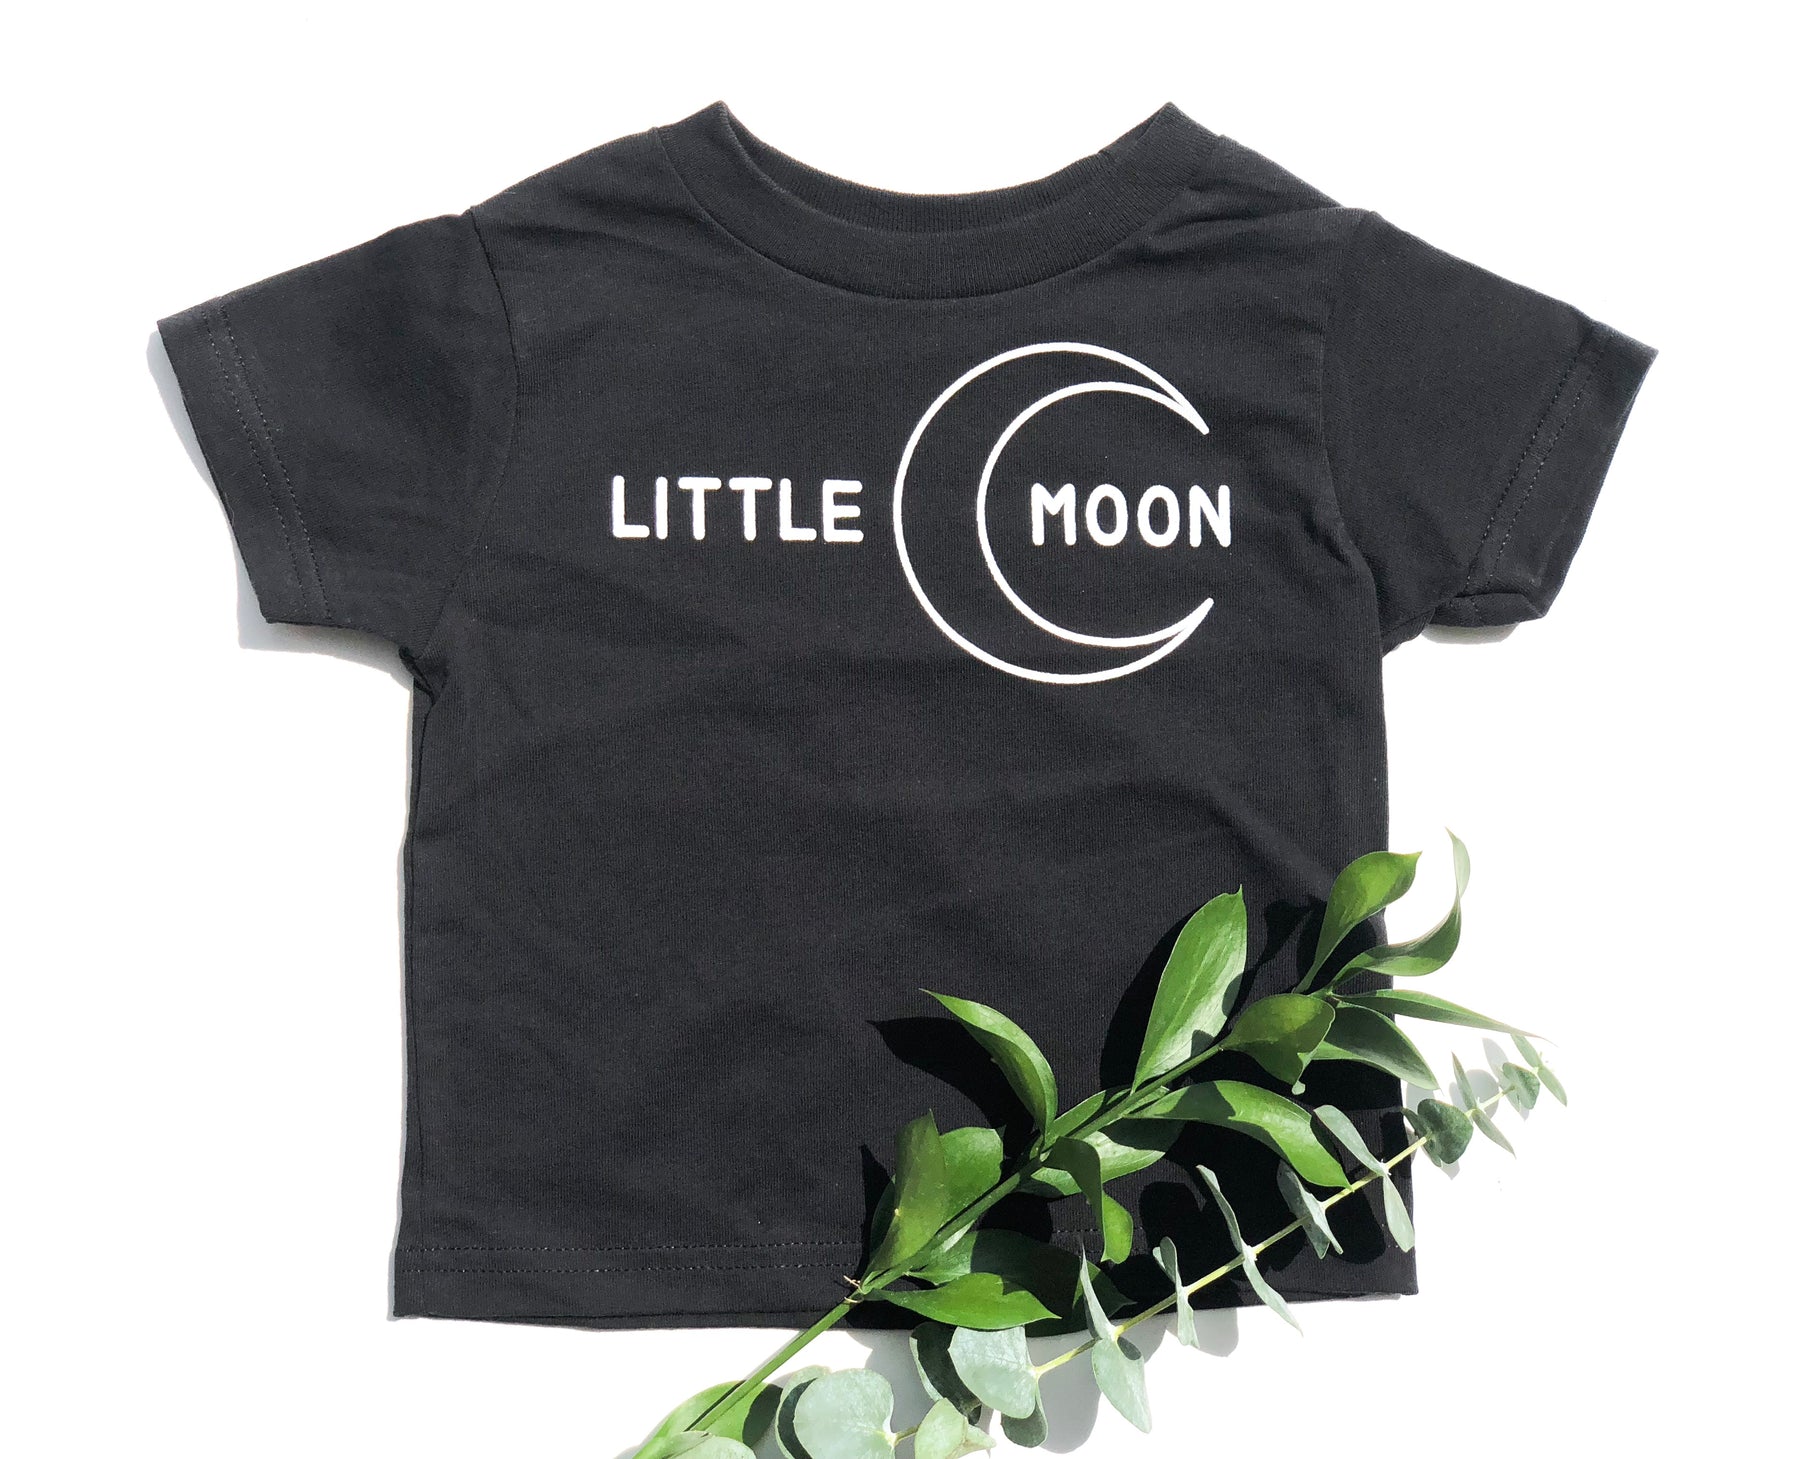 Kids little moon tee with moon graphic 